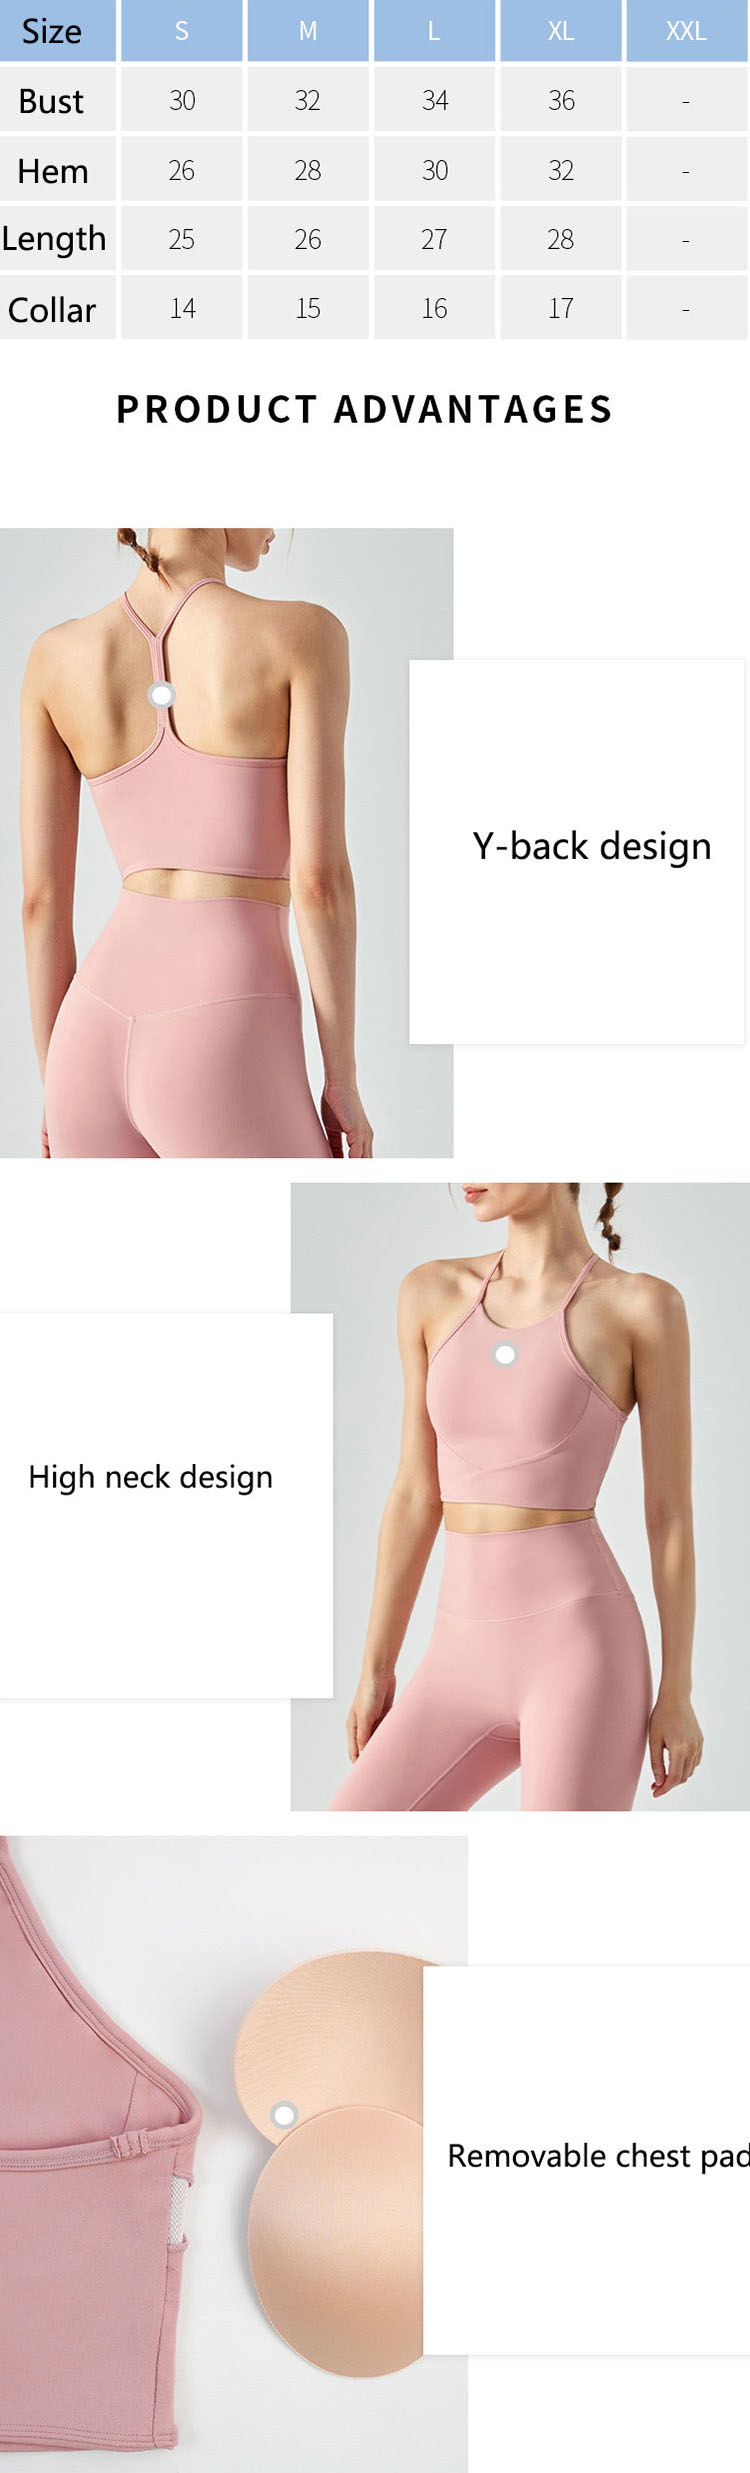 The Y-shaped back design shows a sexy back and wicks sweat quickly